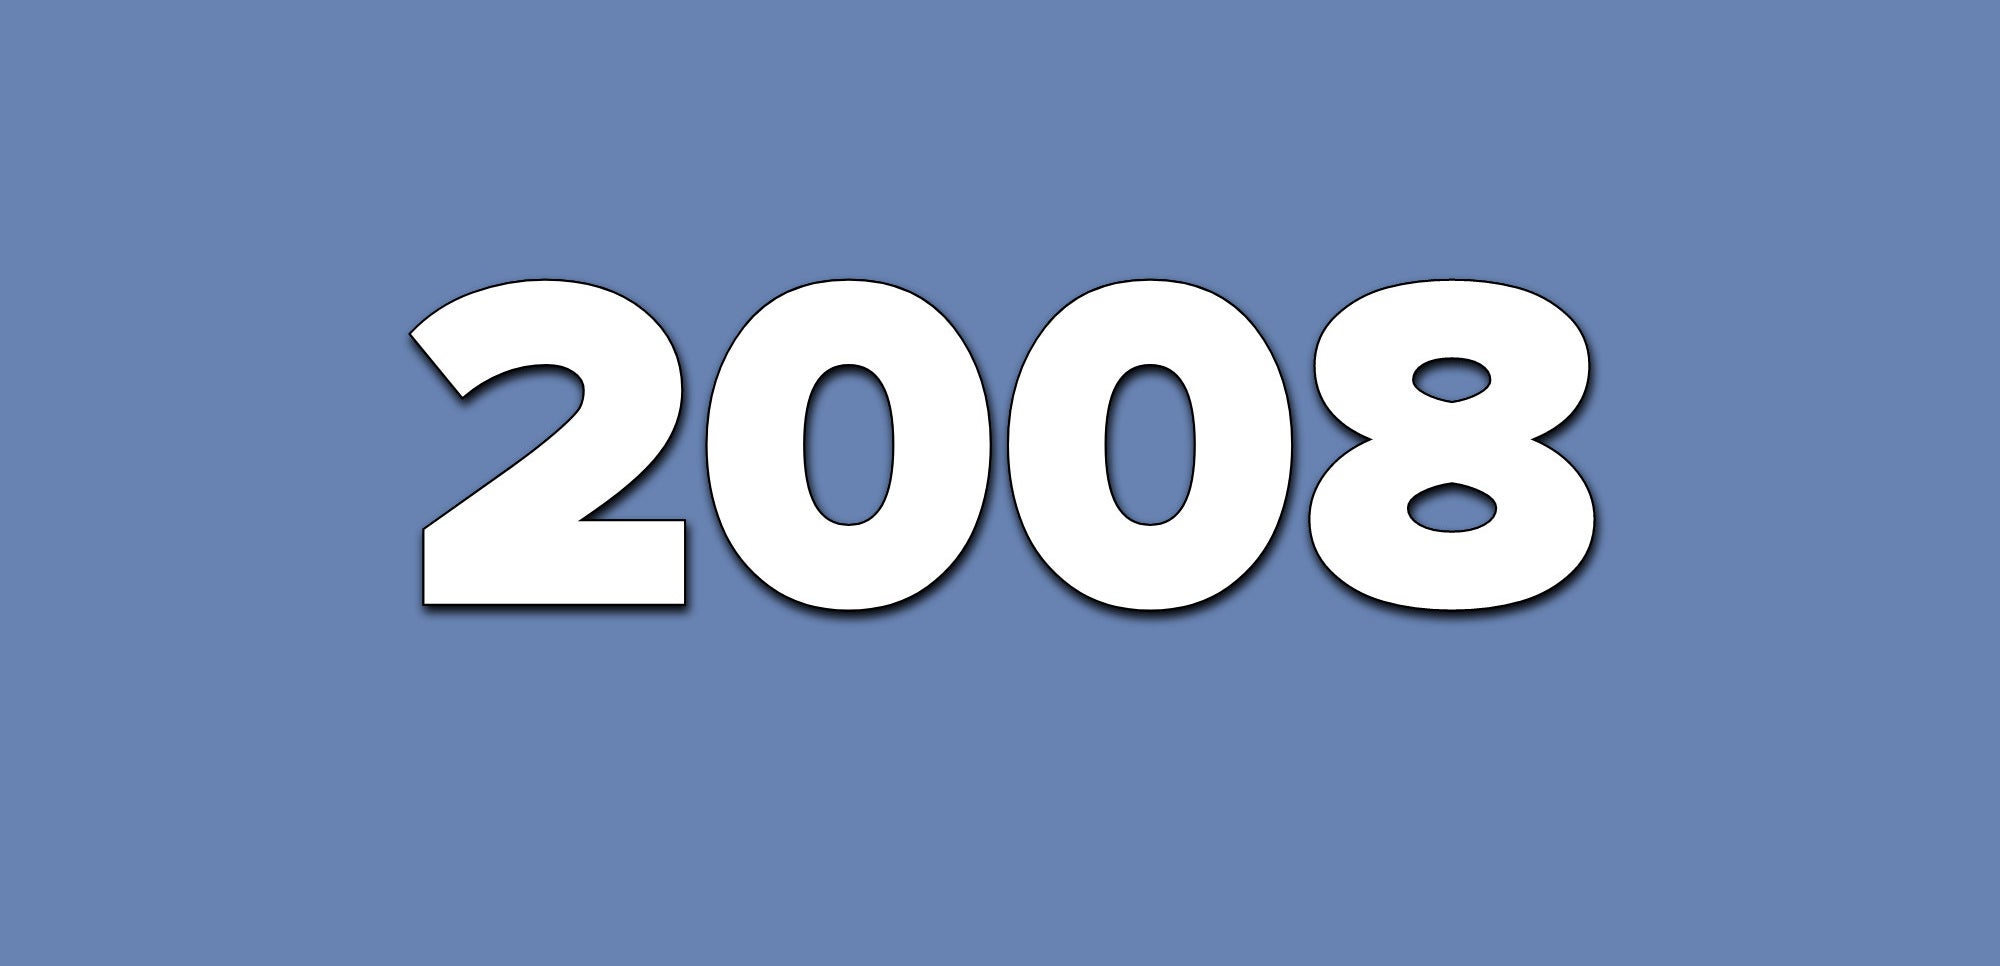 A blue background with text that says 2008